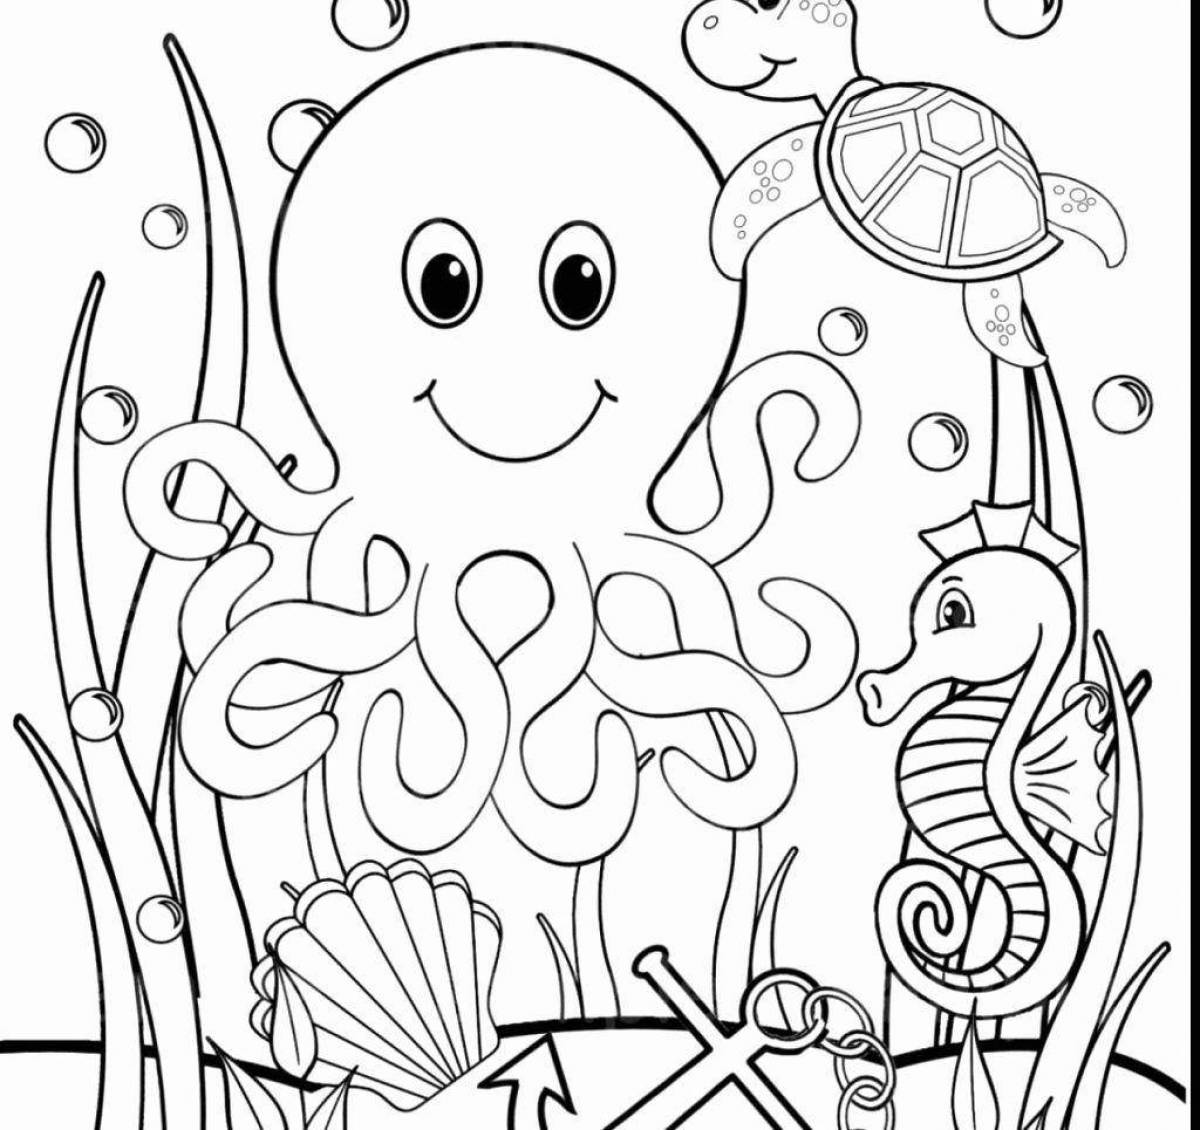 Shiny underwater world coloring page